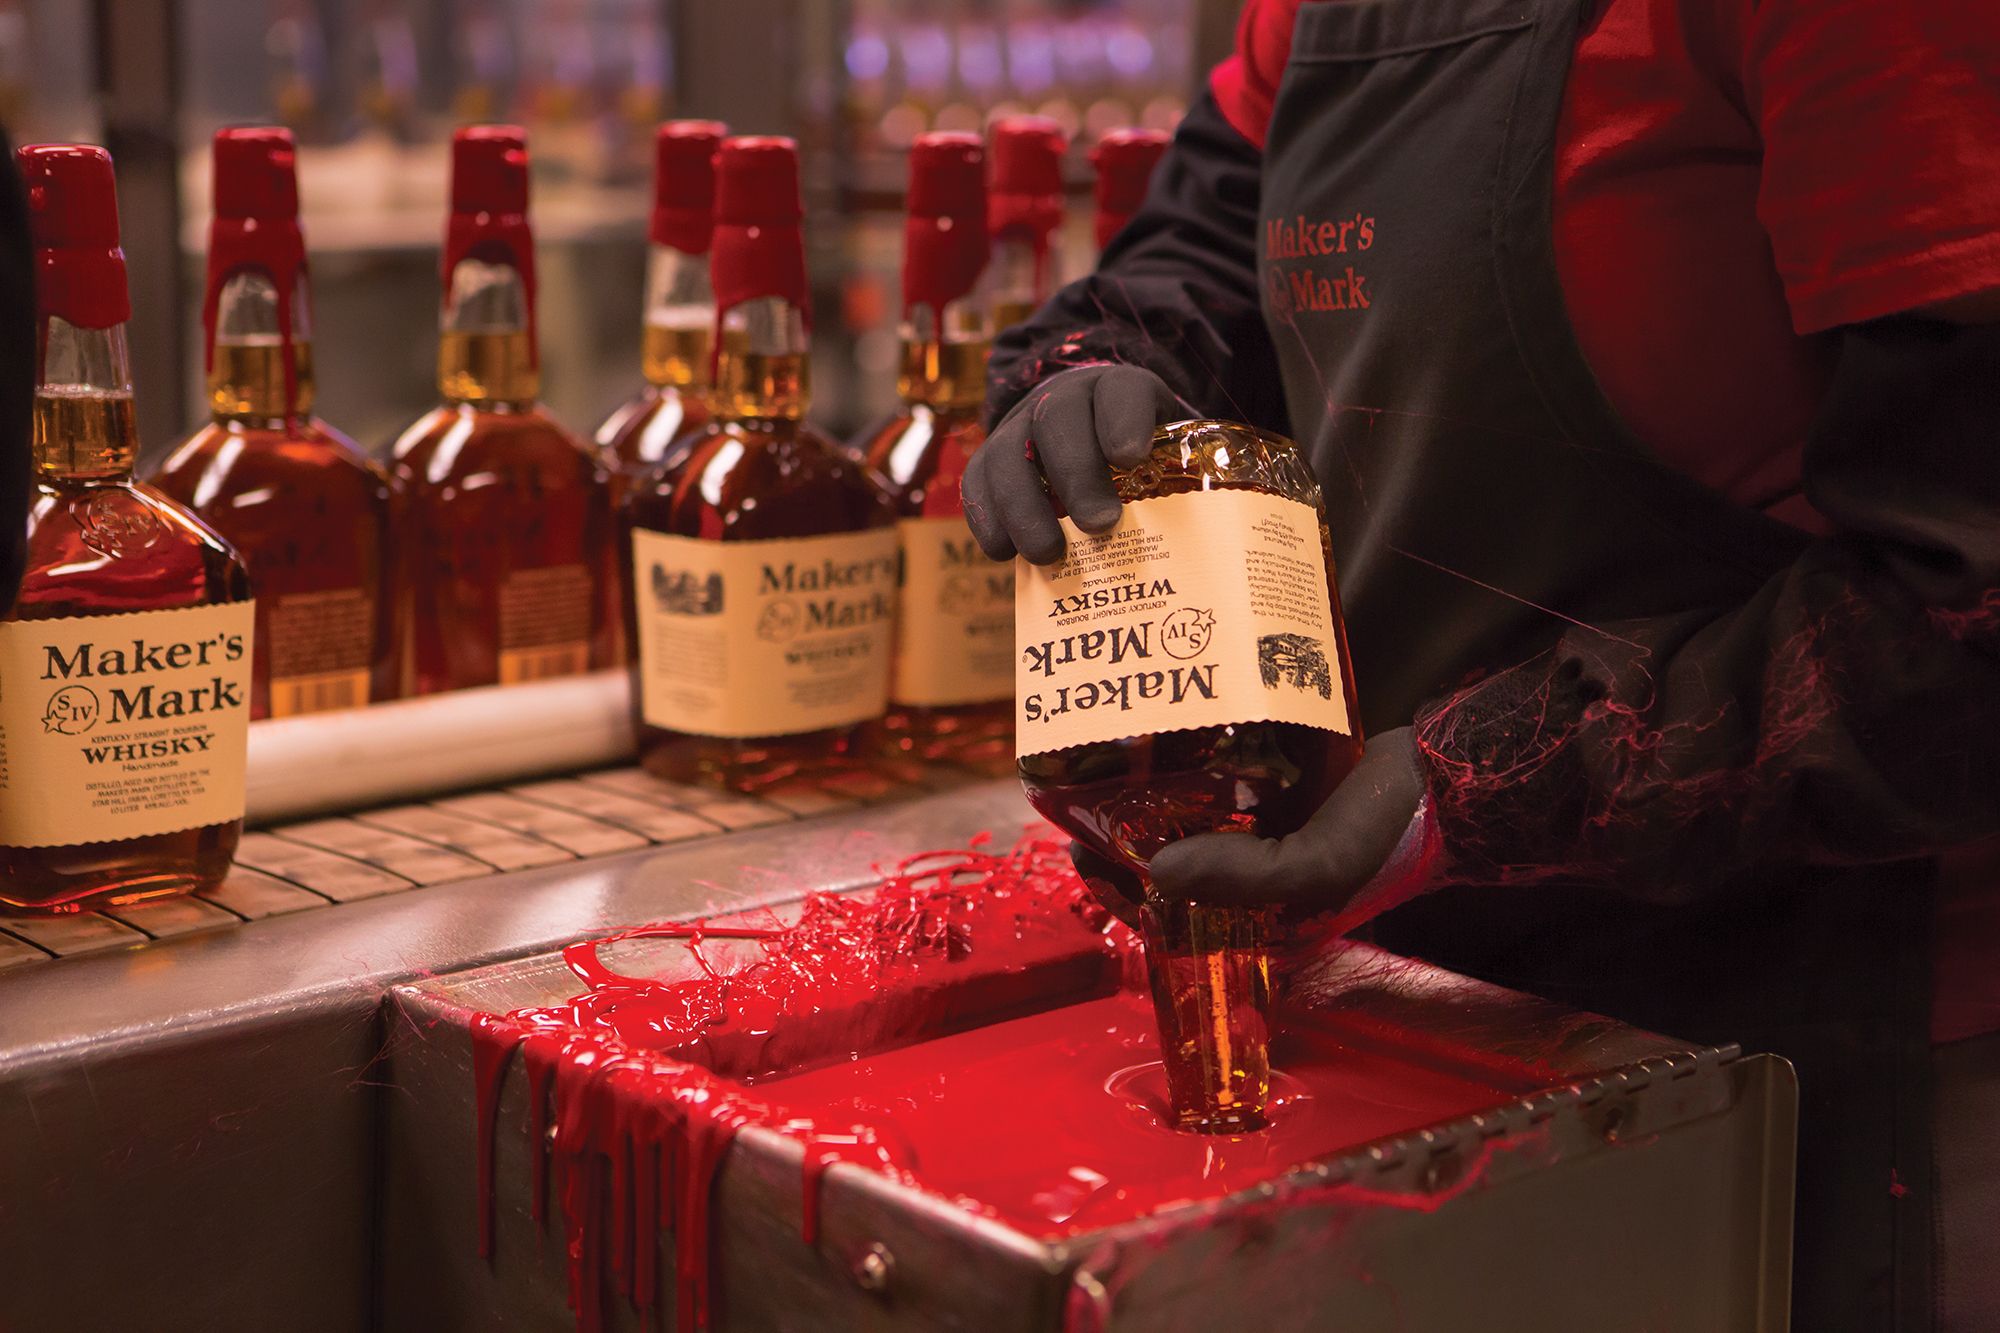 Hand-dipping Maker's Mark bottles into red wax